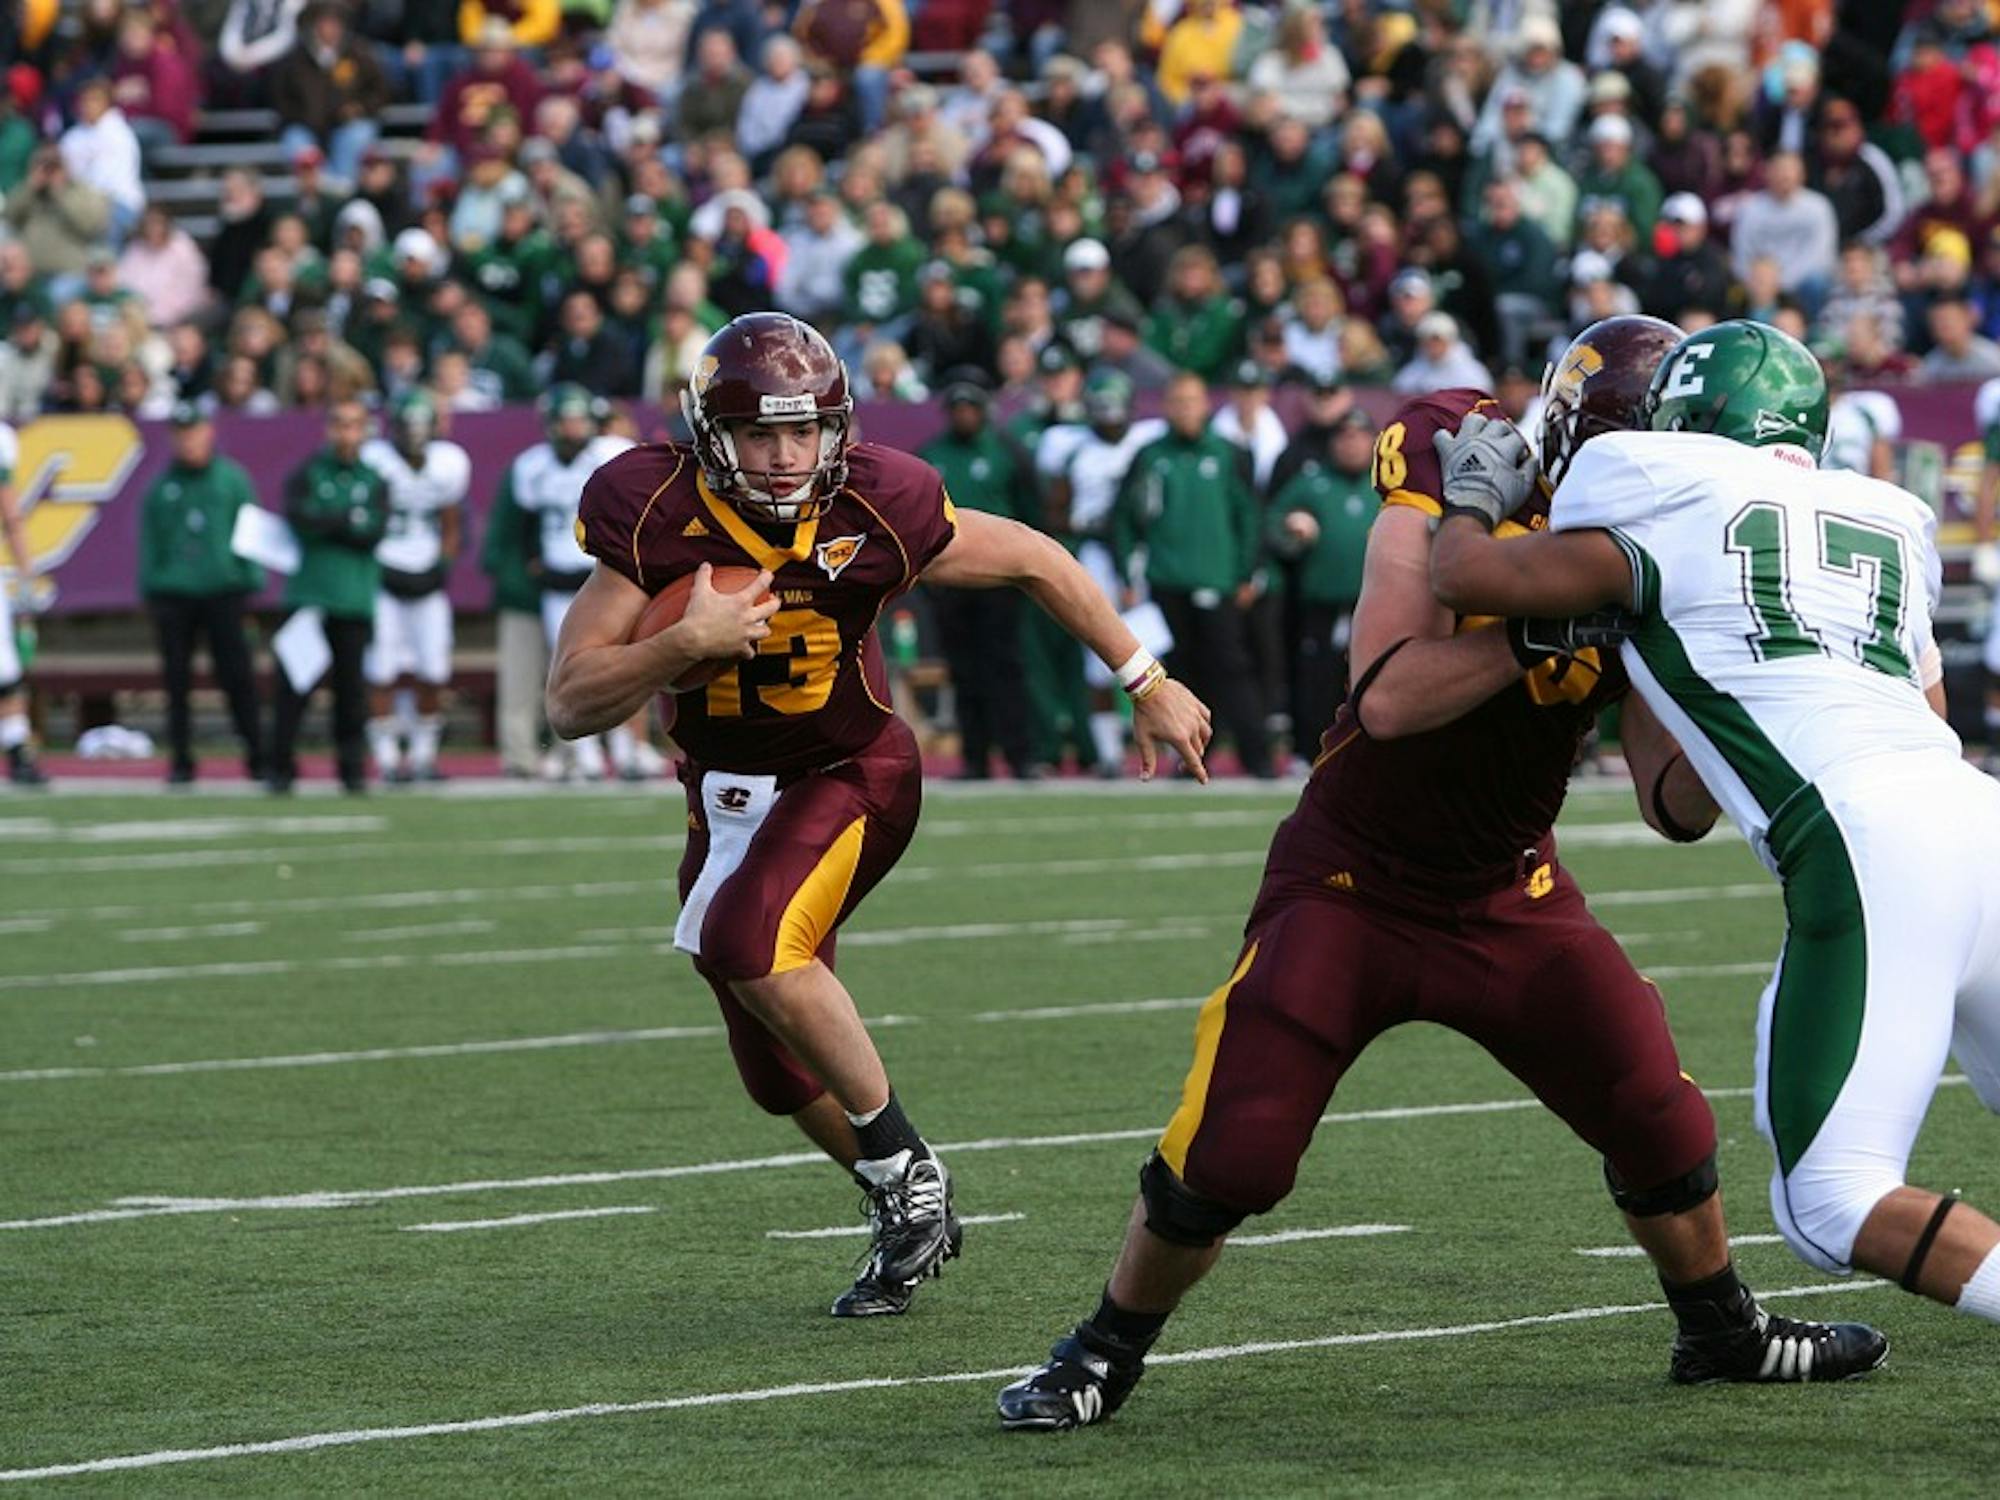 Dan LeFevour (13) in Central Michigan’s 56-8 win over Eastern Michigan on Saturday. He tied a career high with six touchdowns (3 passing, 3 rushing).